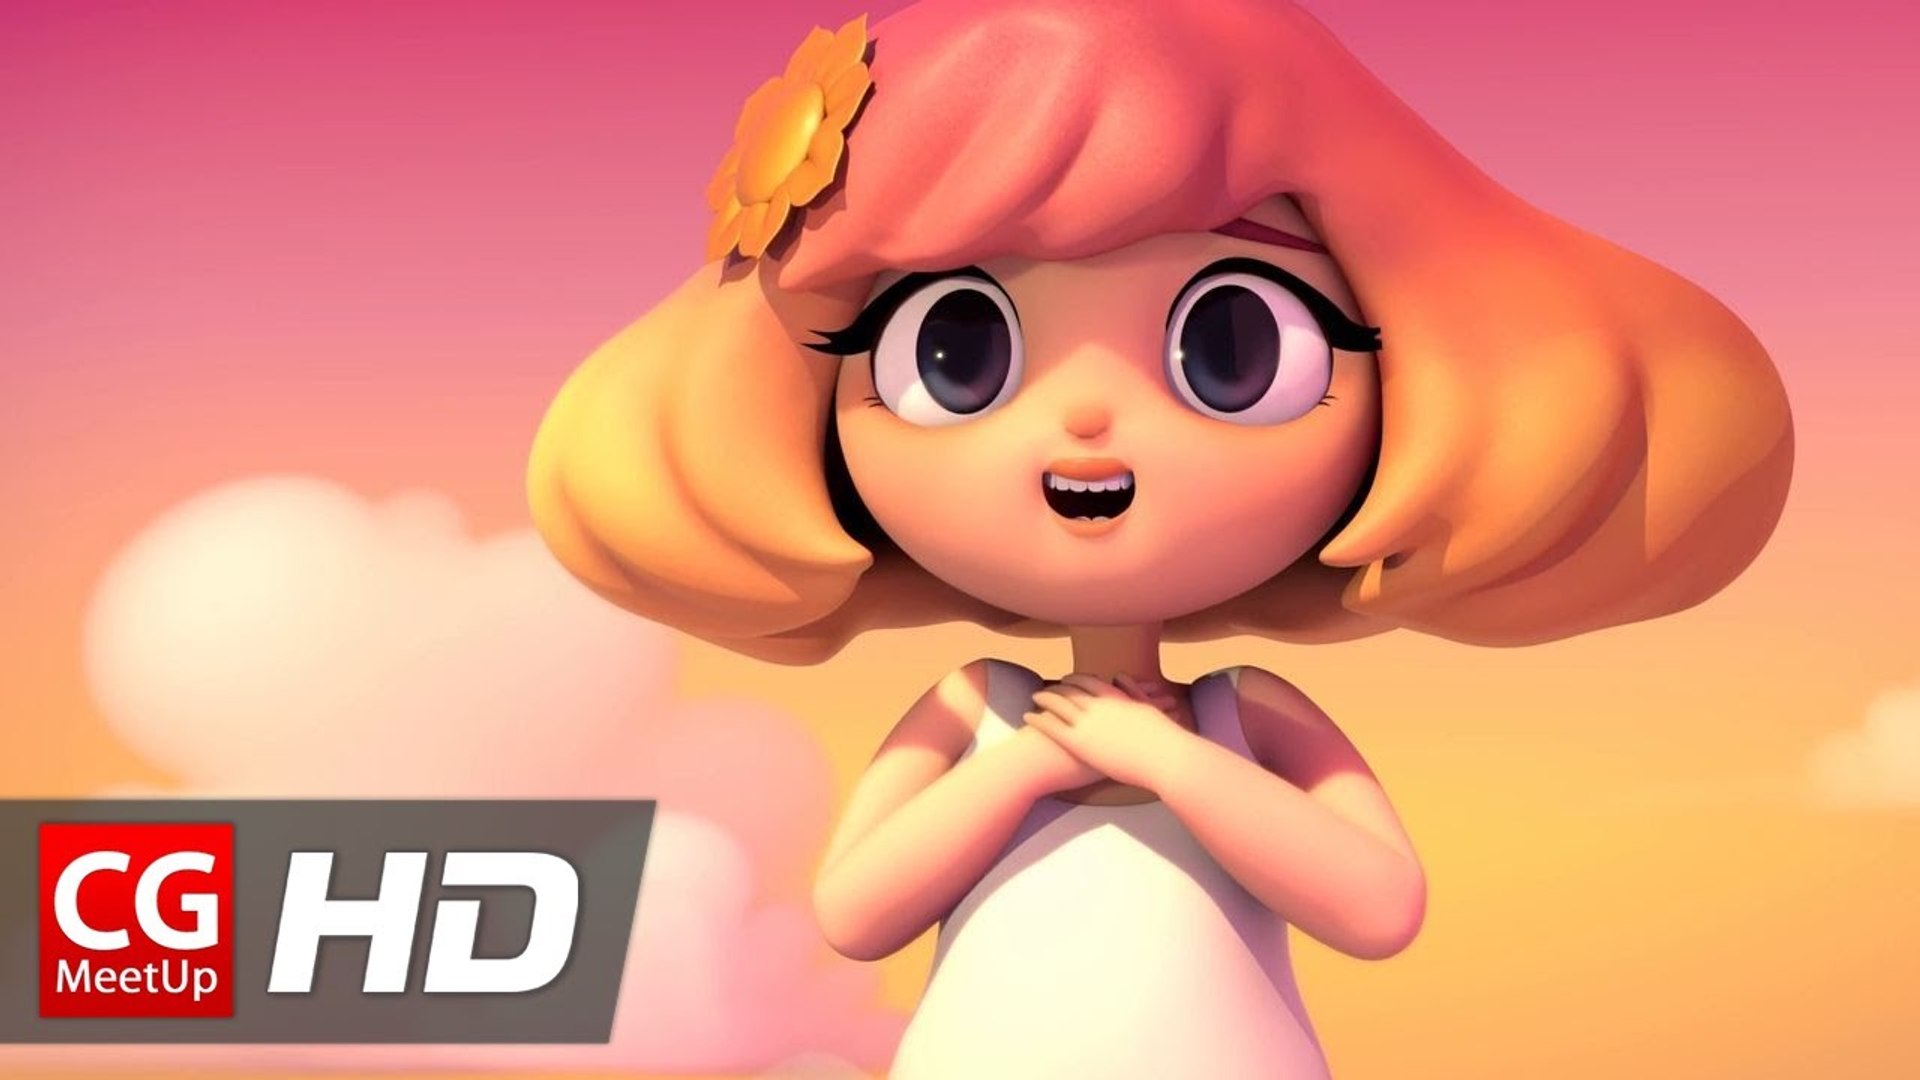 CGI Animated Film HD "Course of Nature " by Lucy Xue and Paisley Manga | CGMeetup - video Dailymotion